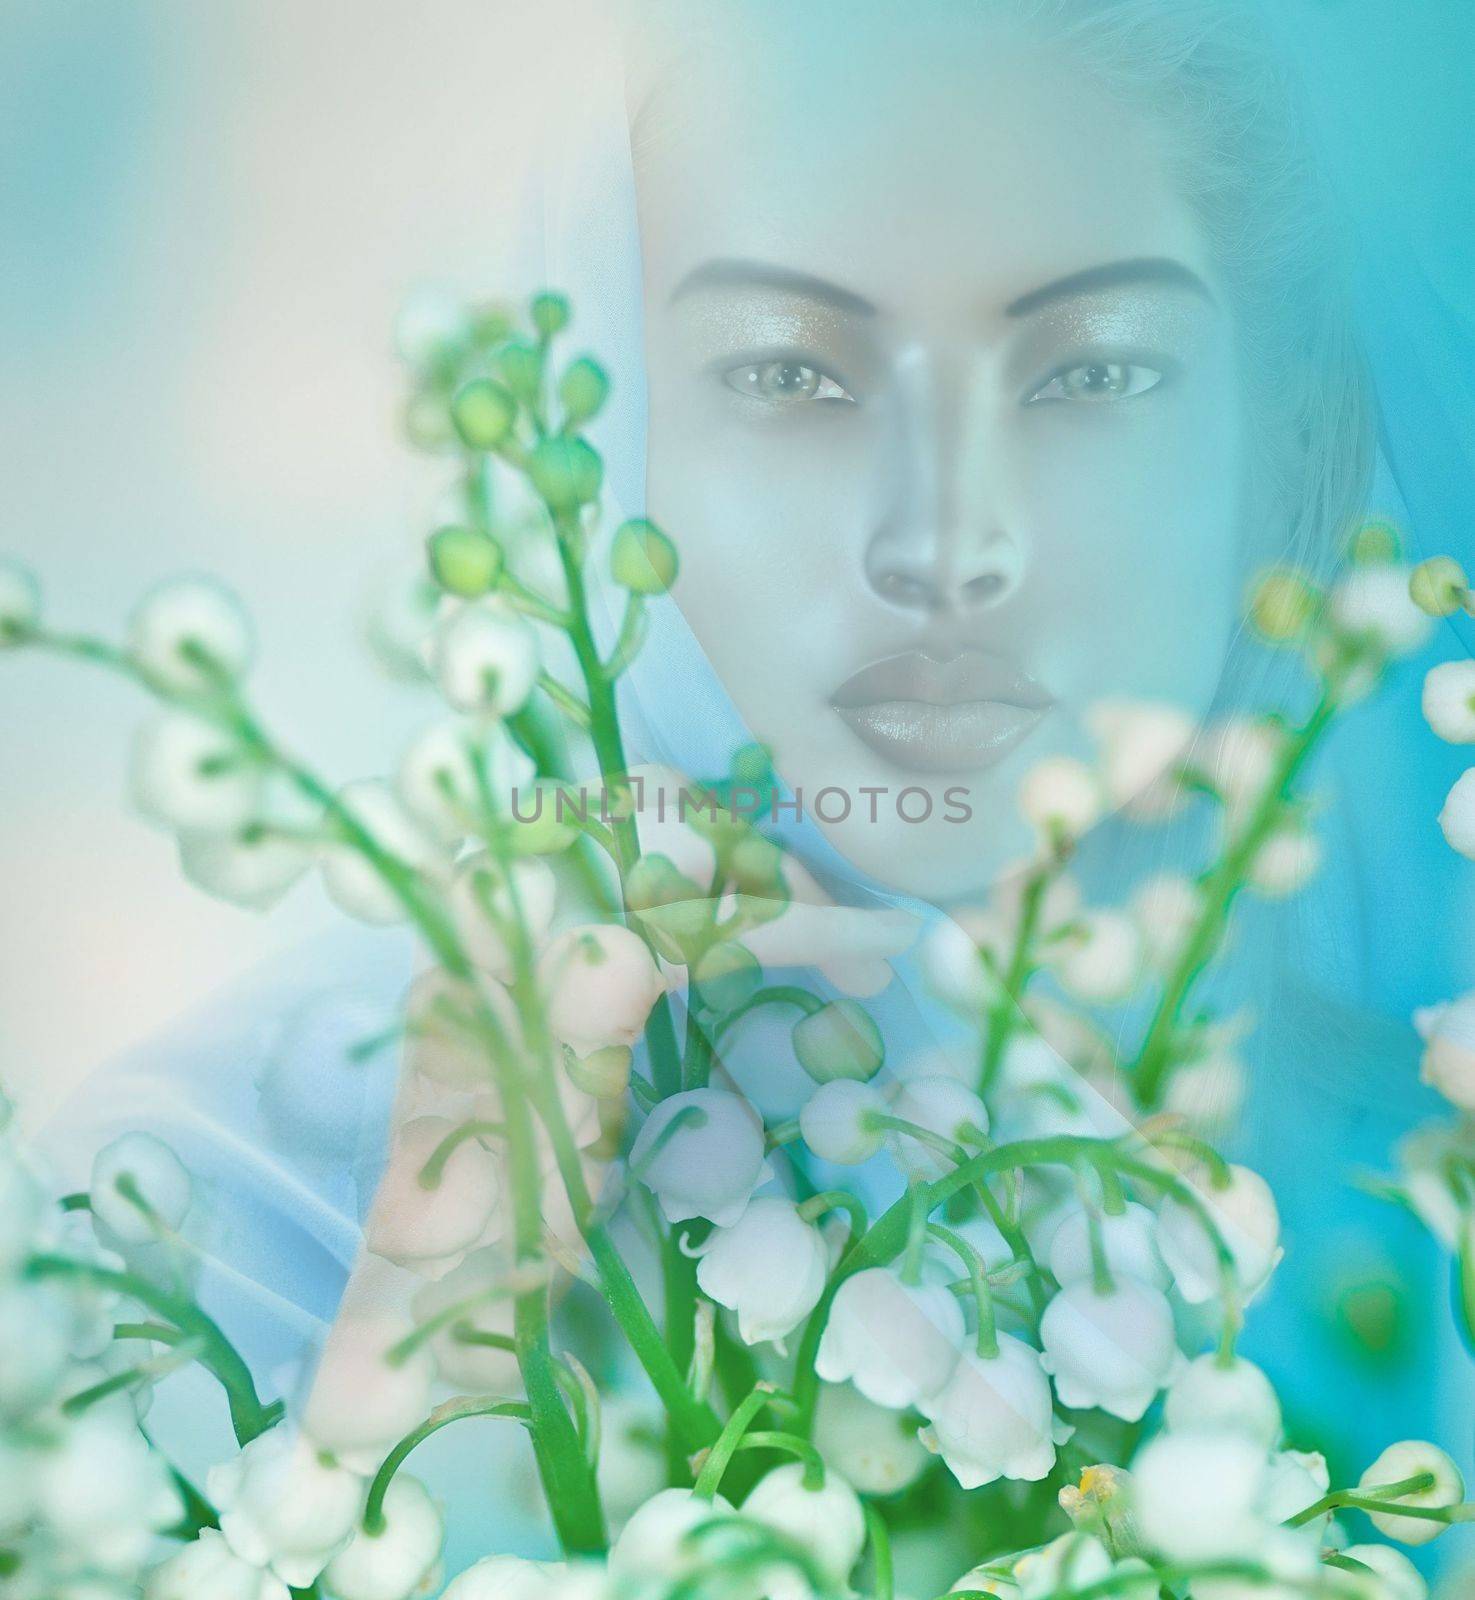 Vision or apparition of spiritual woman in a field of flowers. Serenity and peace accompany this image enhanced by soft lighting and a gradient background.